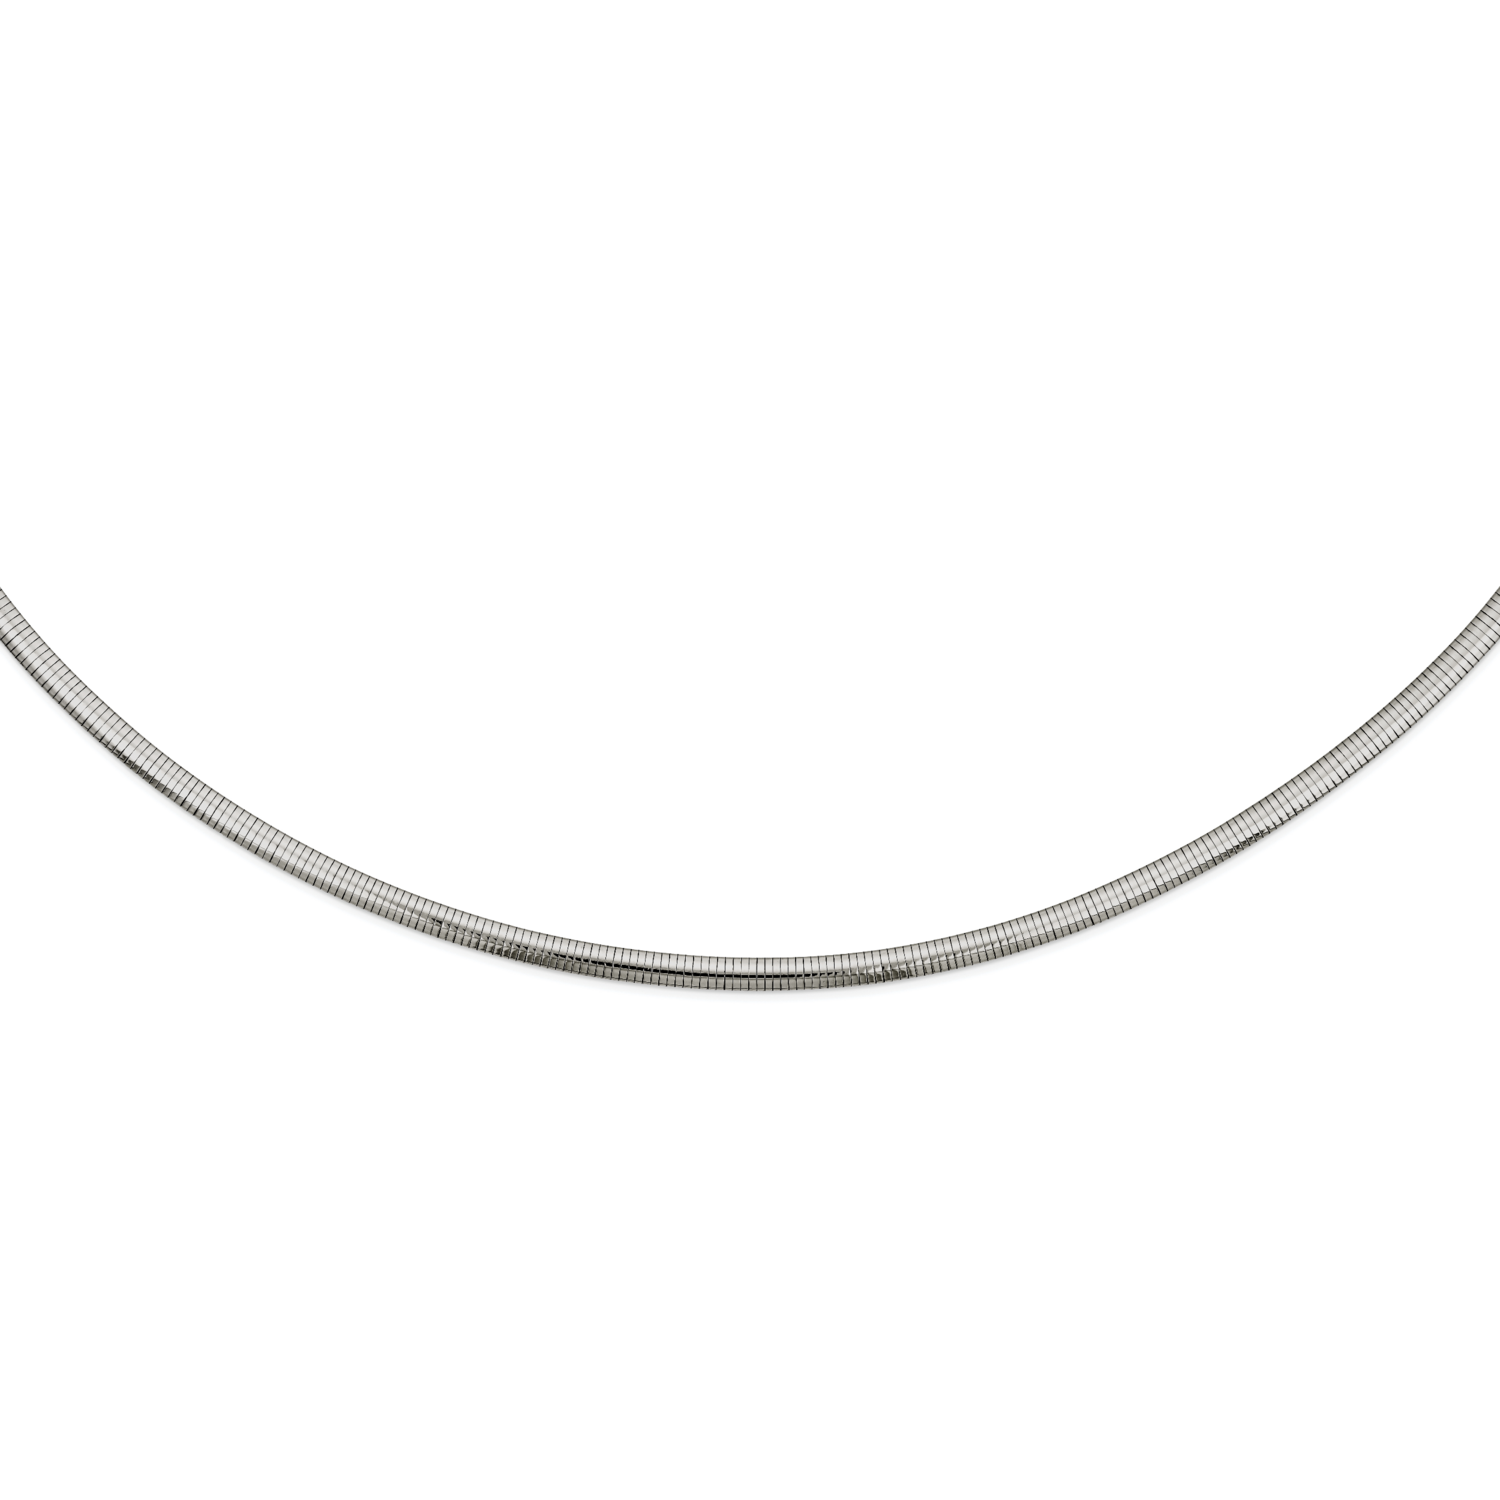 6mm Omega Necklace Stainless Steel SRN1110-18